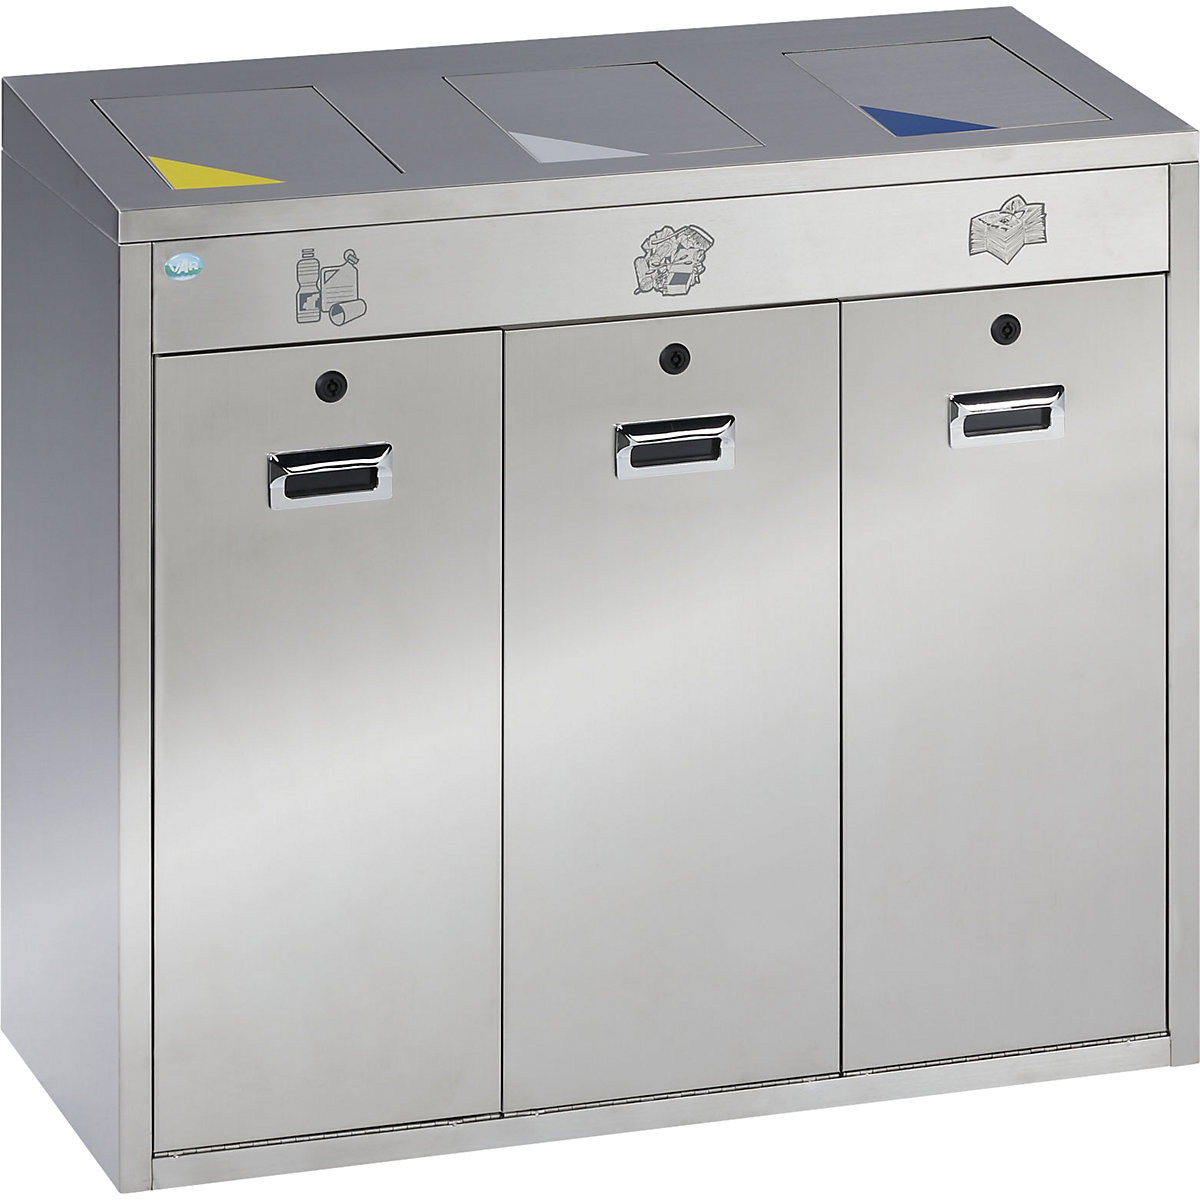 Recyclable waste sorting system, stainless steel - VAR